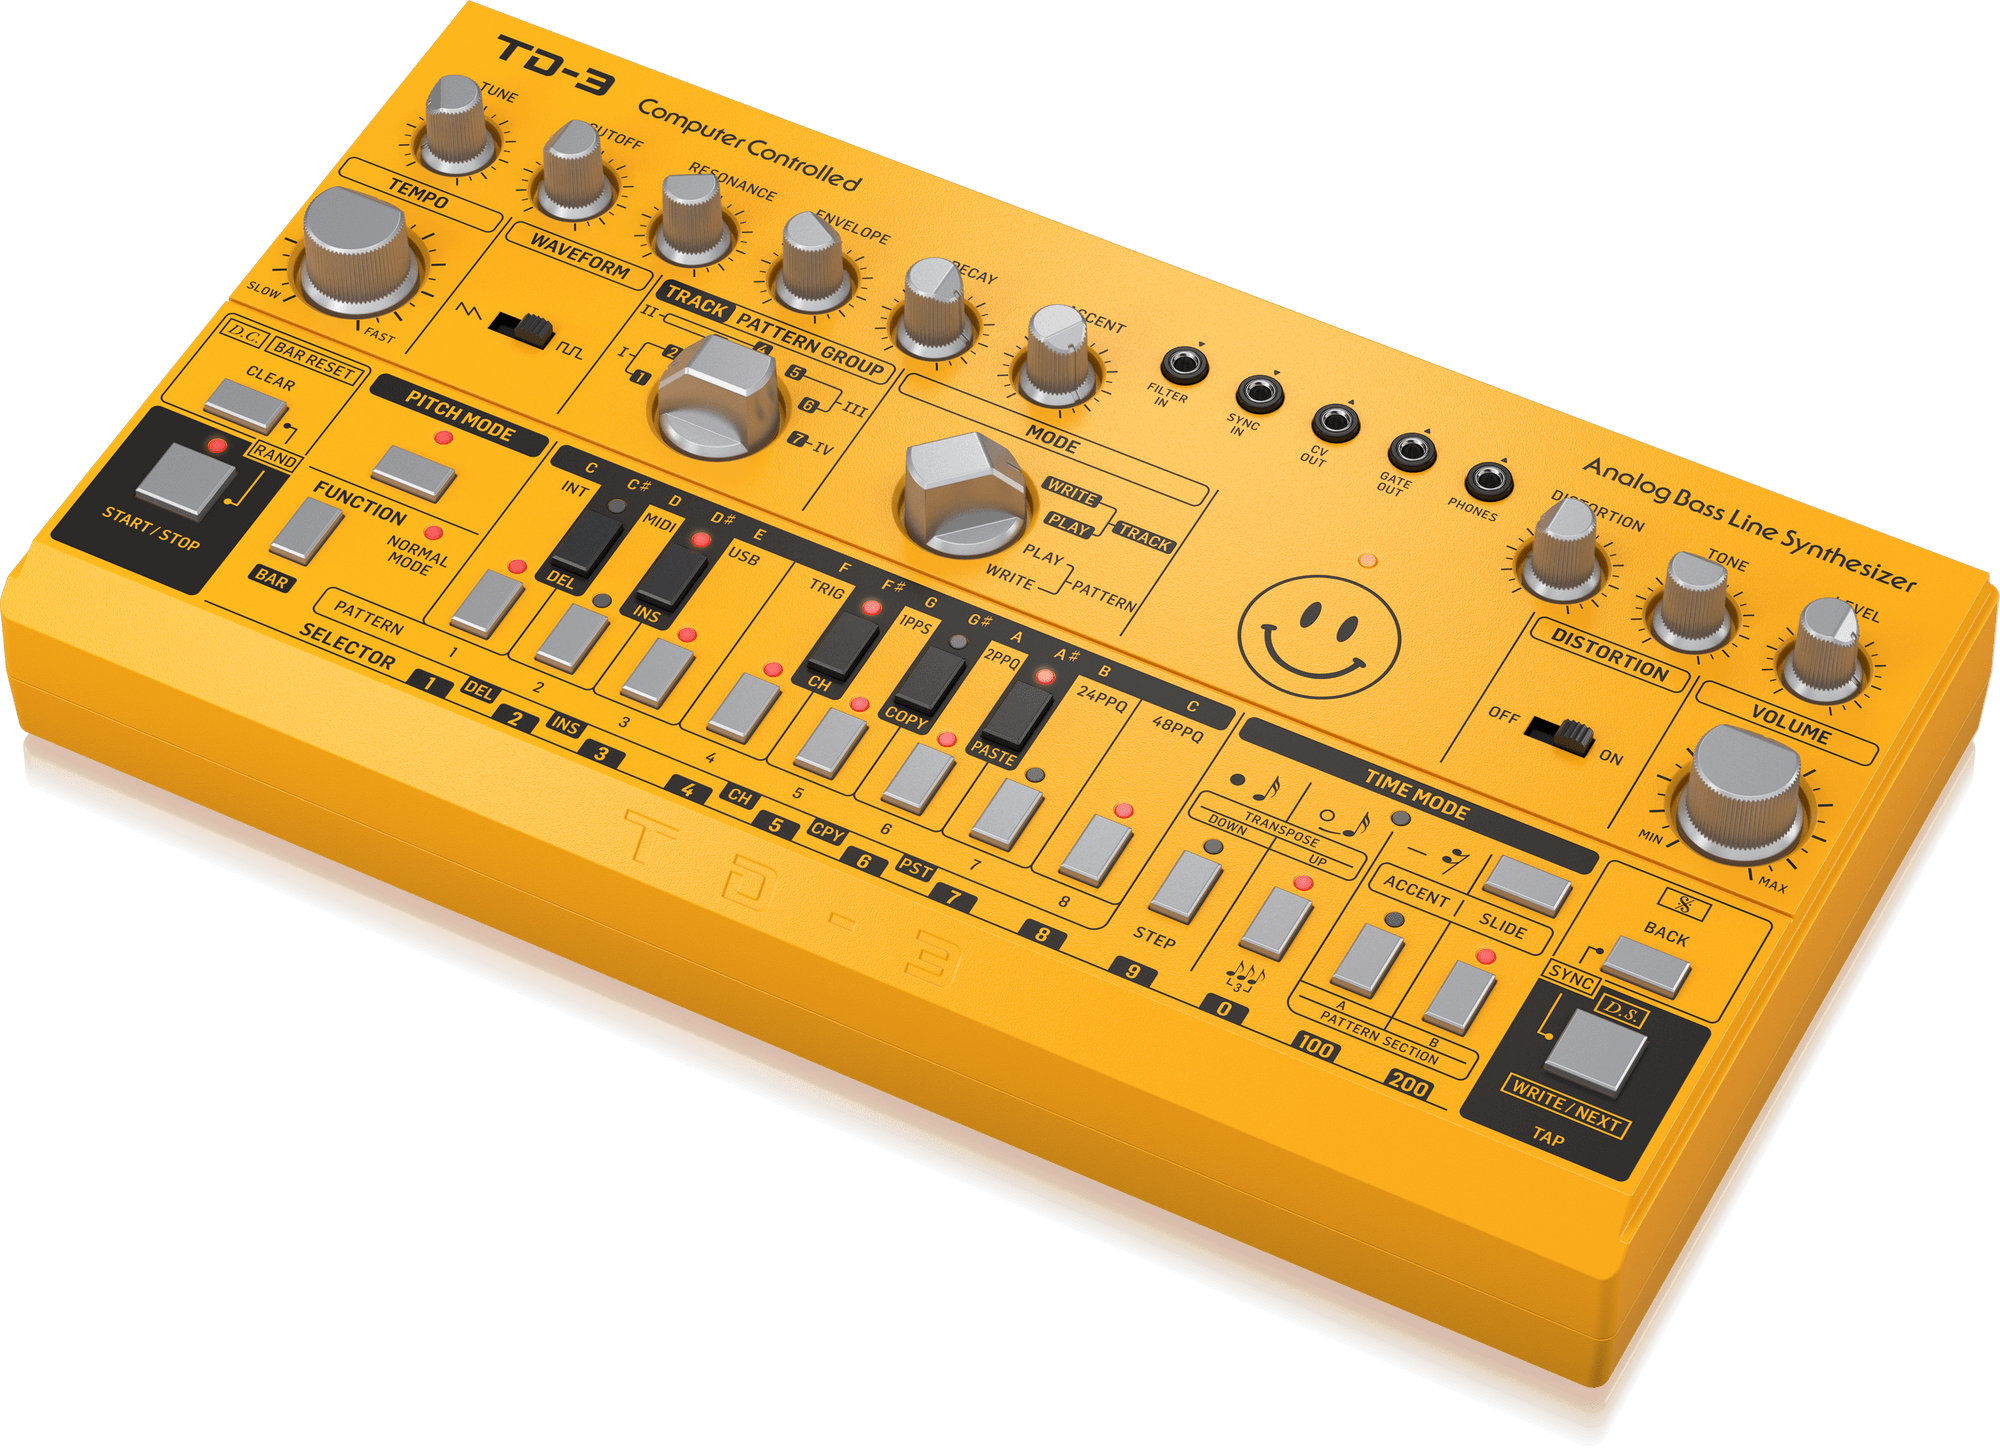 Behringer TD-3-AM Analog Bass Line Synthesizer - Yellow | BEHRINGER , Zoso Music